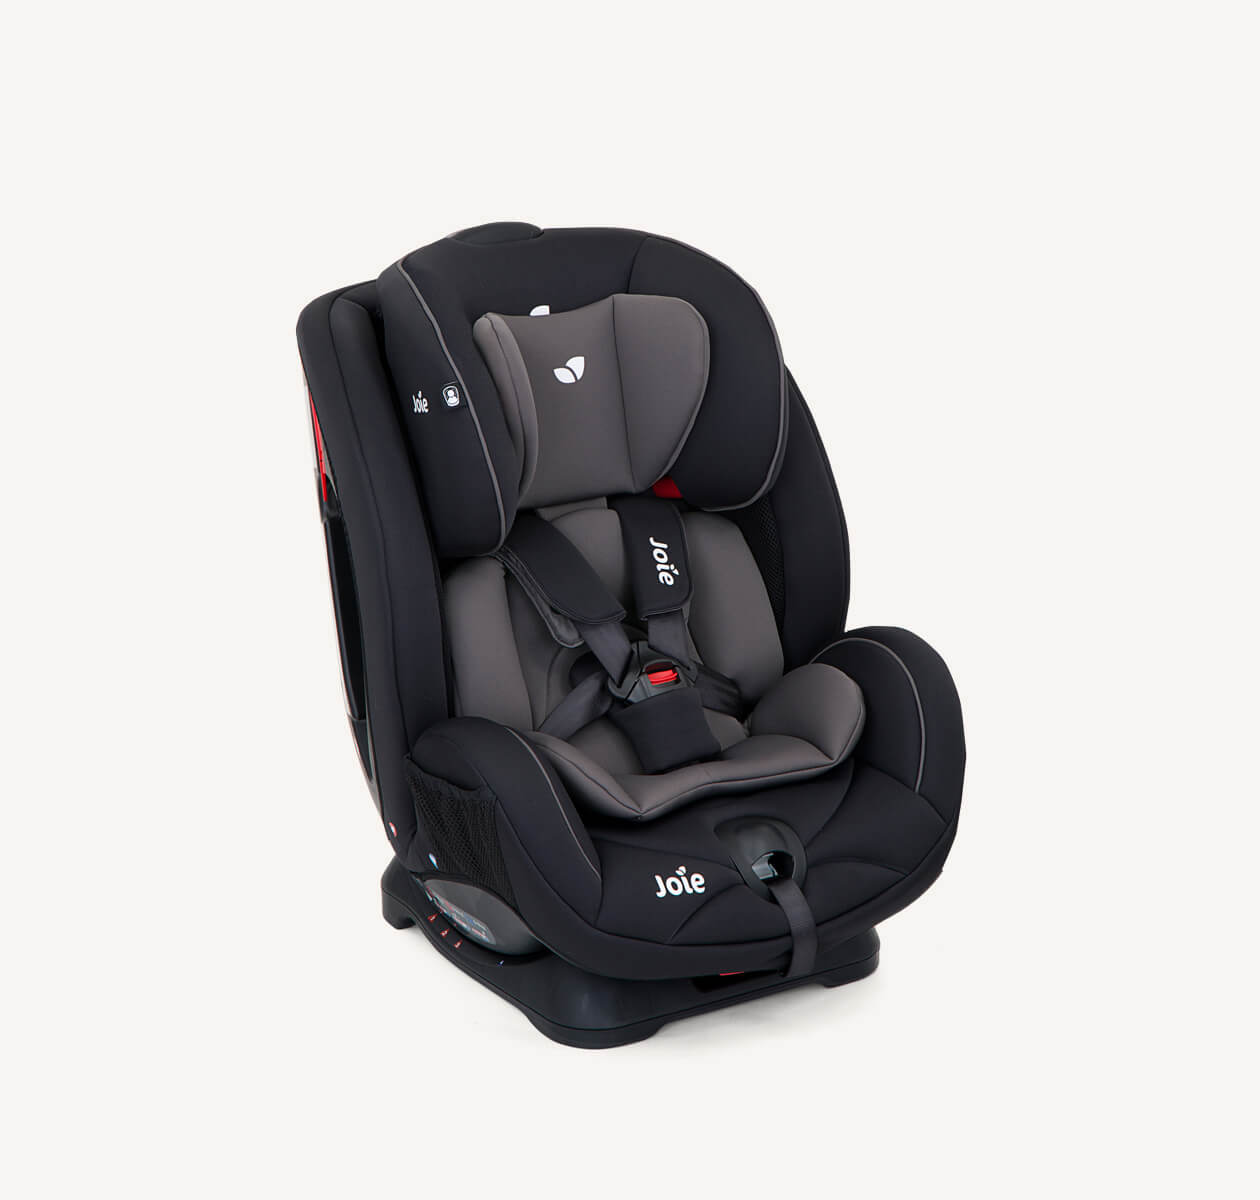 Joie stages convertible car seat| adaptable, from birth to 7